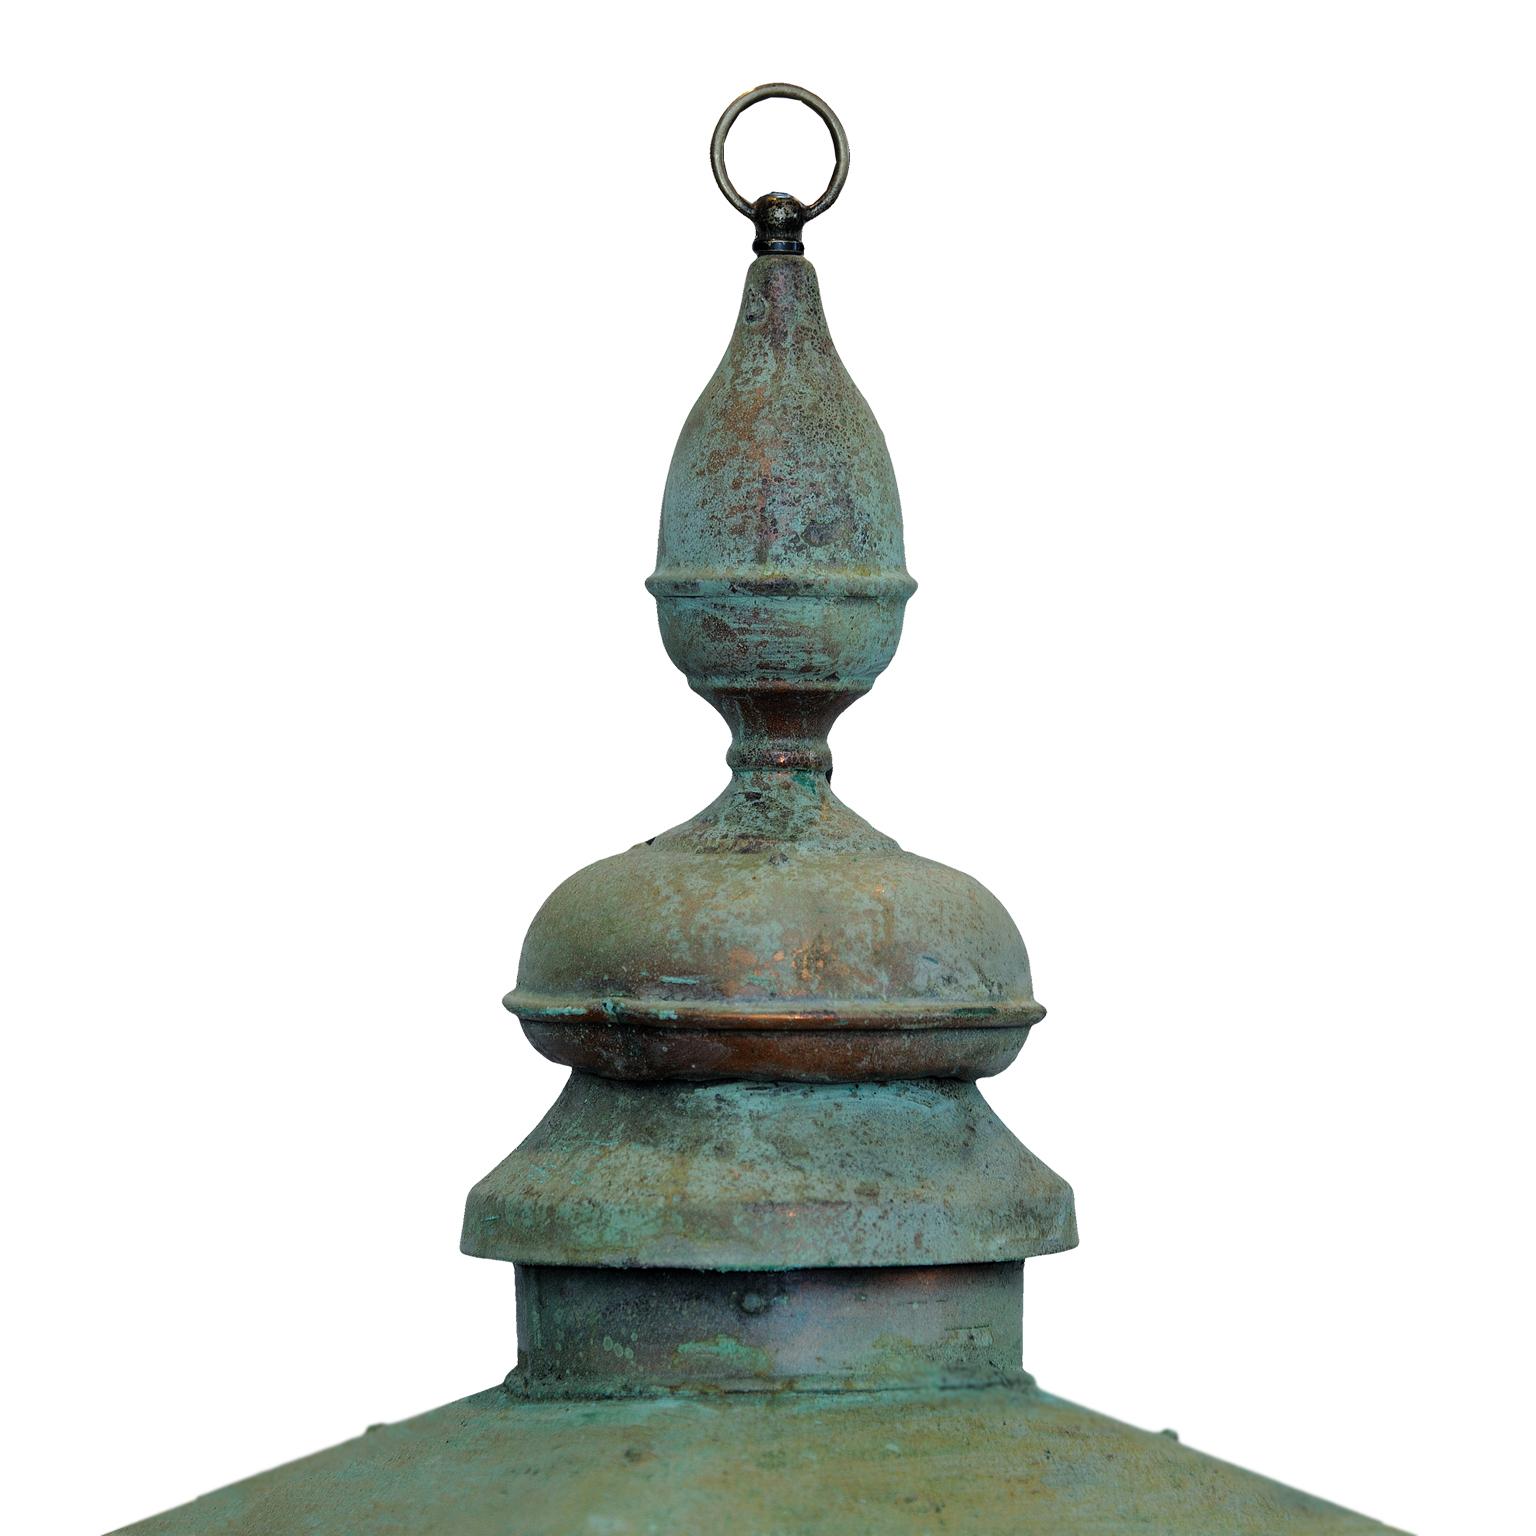 This is a large and very stylish mid-19th century English verdigris copper hanging lantern, now getting increasingly hard to source, converted to electricity and PAT tested, suitable for interior or exterior use. Complete with lions paw feet, circa